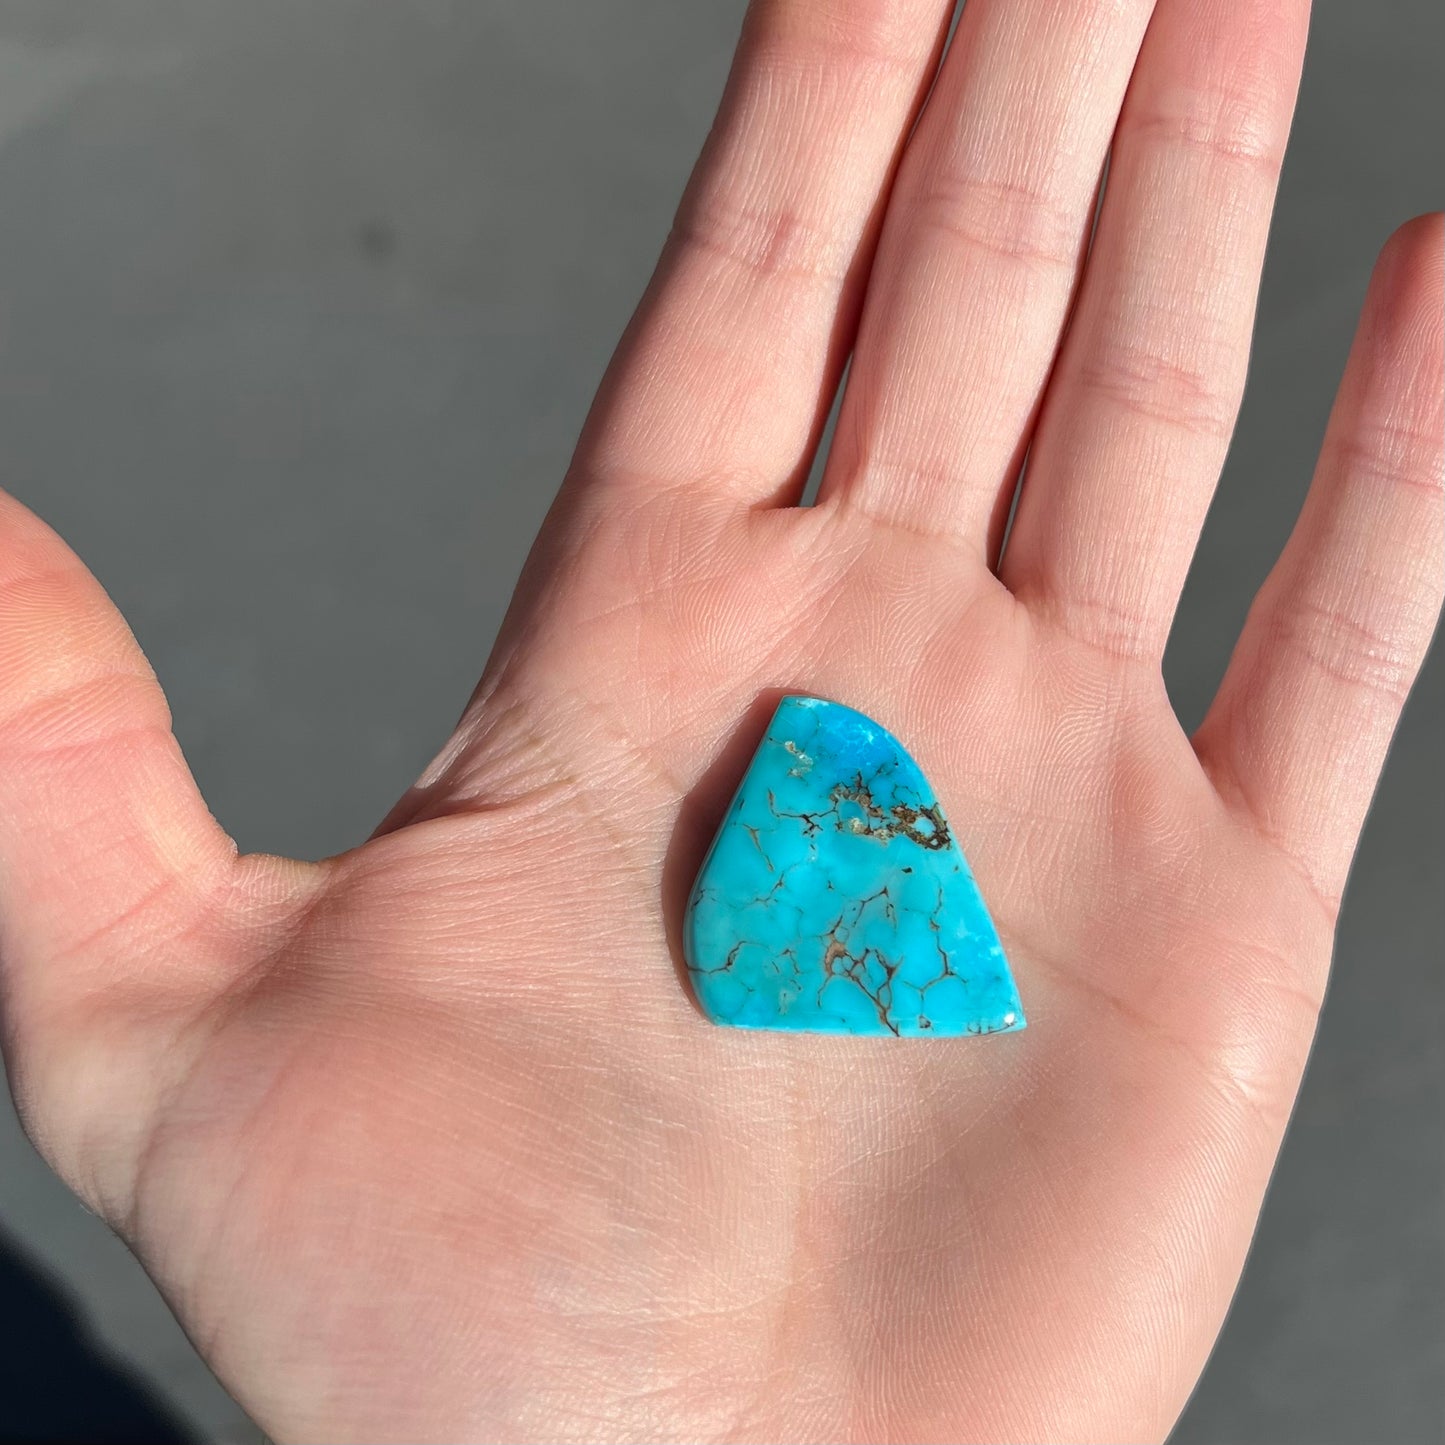 A loose, polished freeform piece of blue turquoise from the Sleeping Beauty Mine in Arizona.